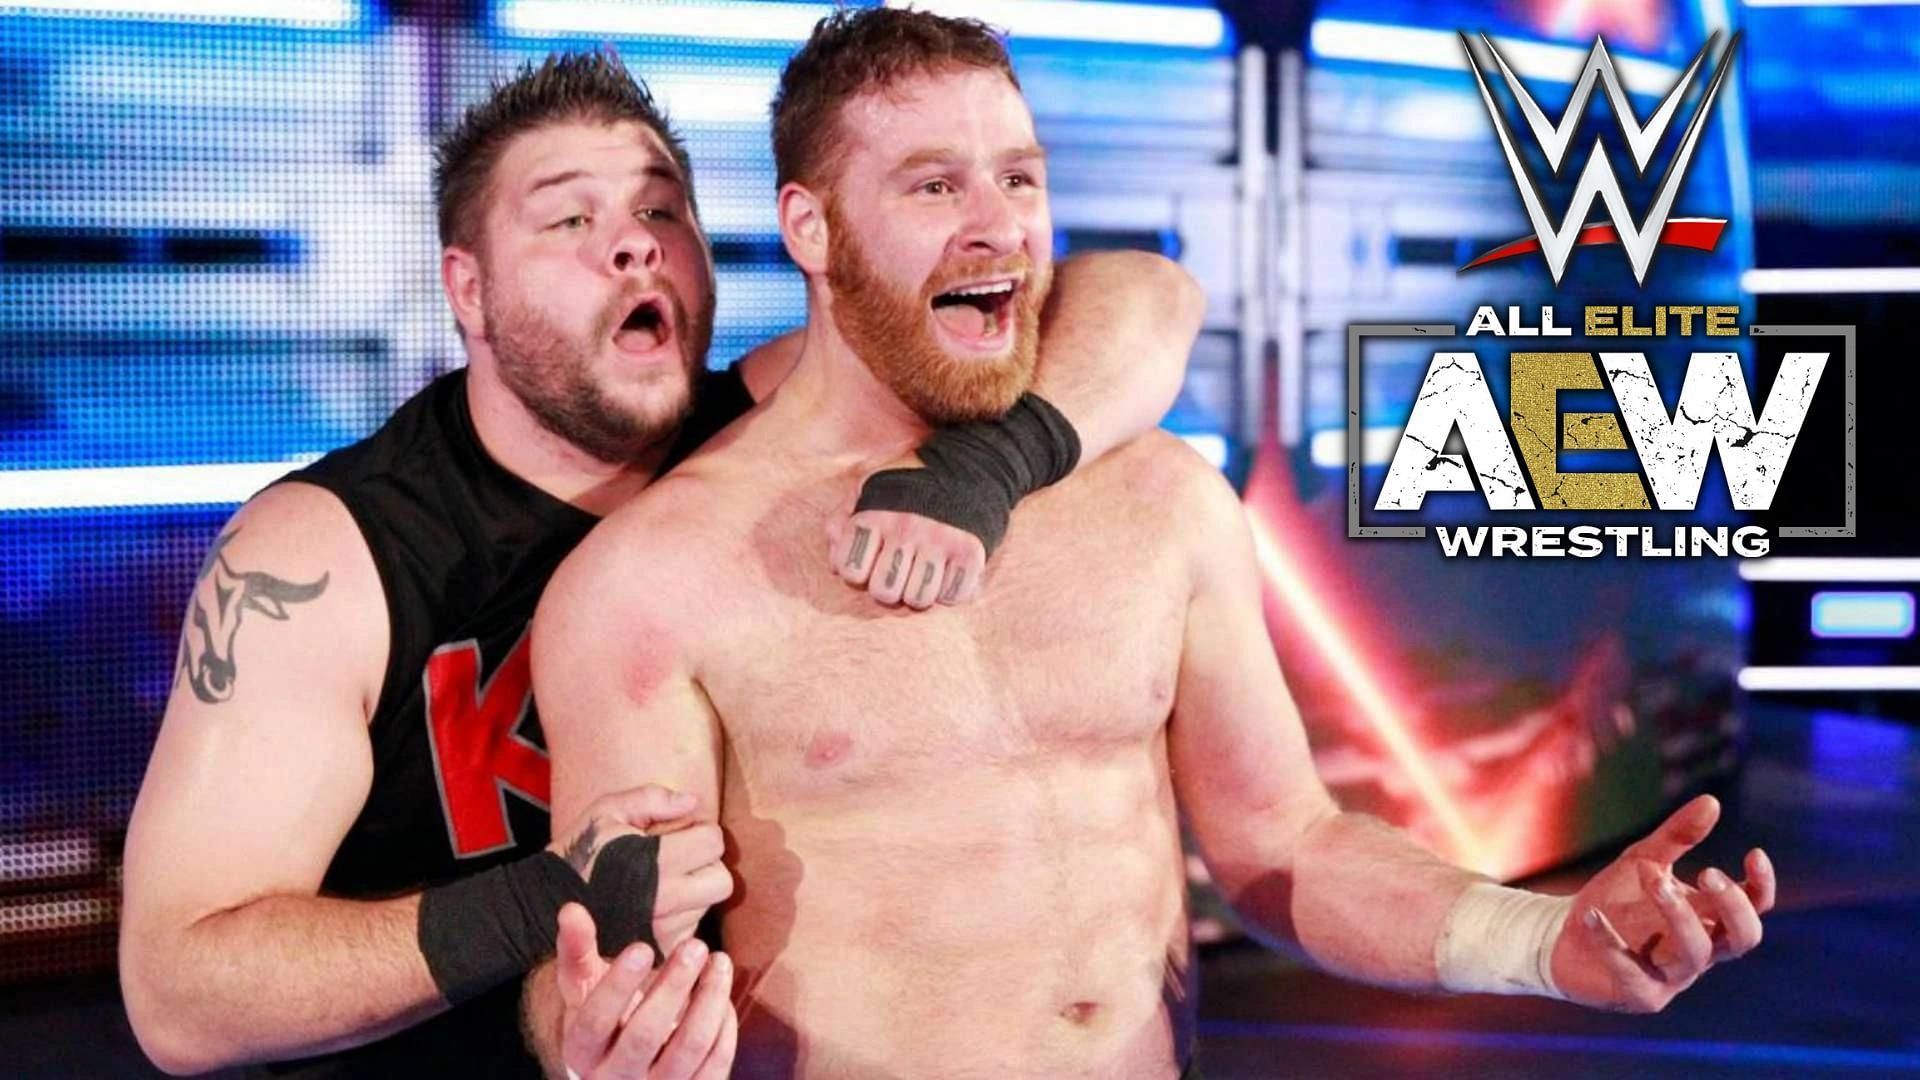 Sami Zayn tried to save Kevin Owens recently at Royal Rumble